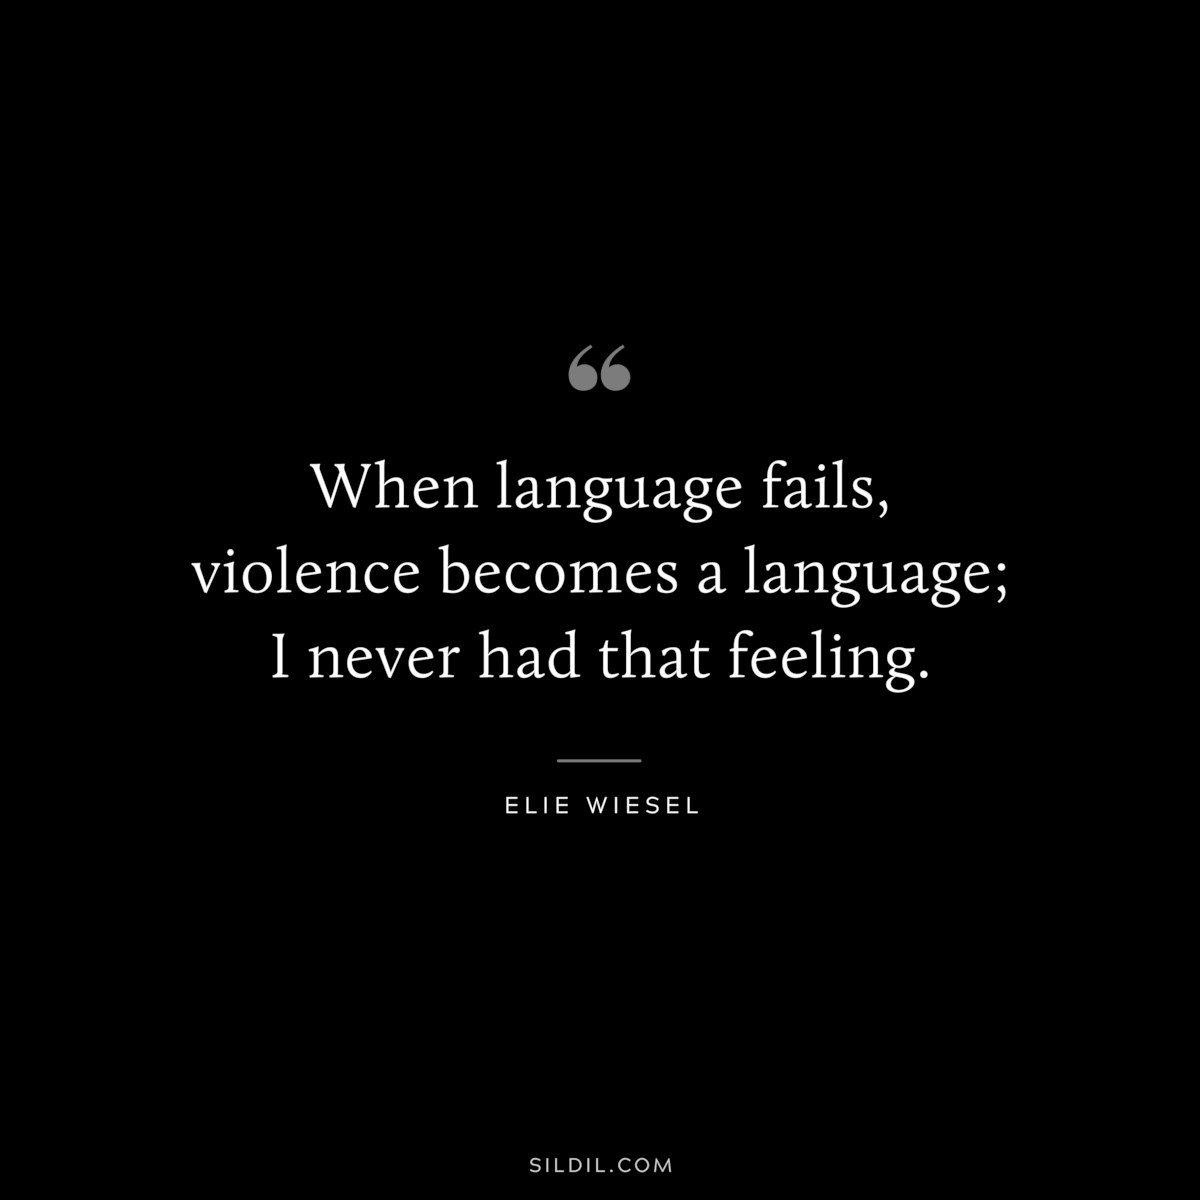 When language fails, violence becomes a language; I never had that feeling. ― Elie Wiesel